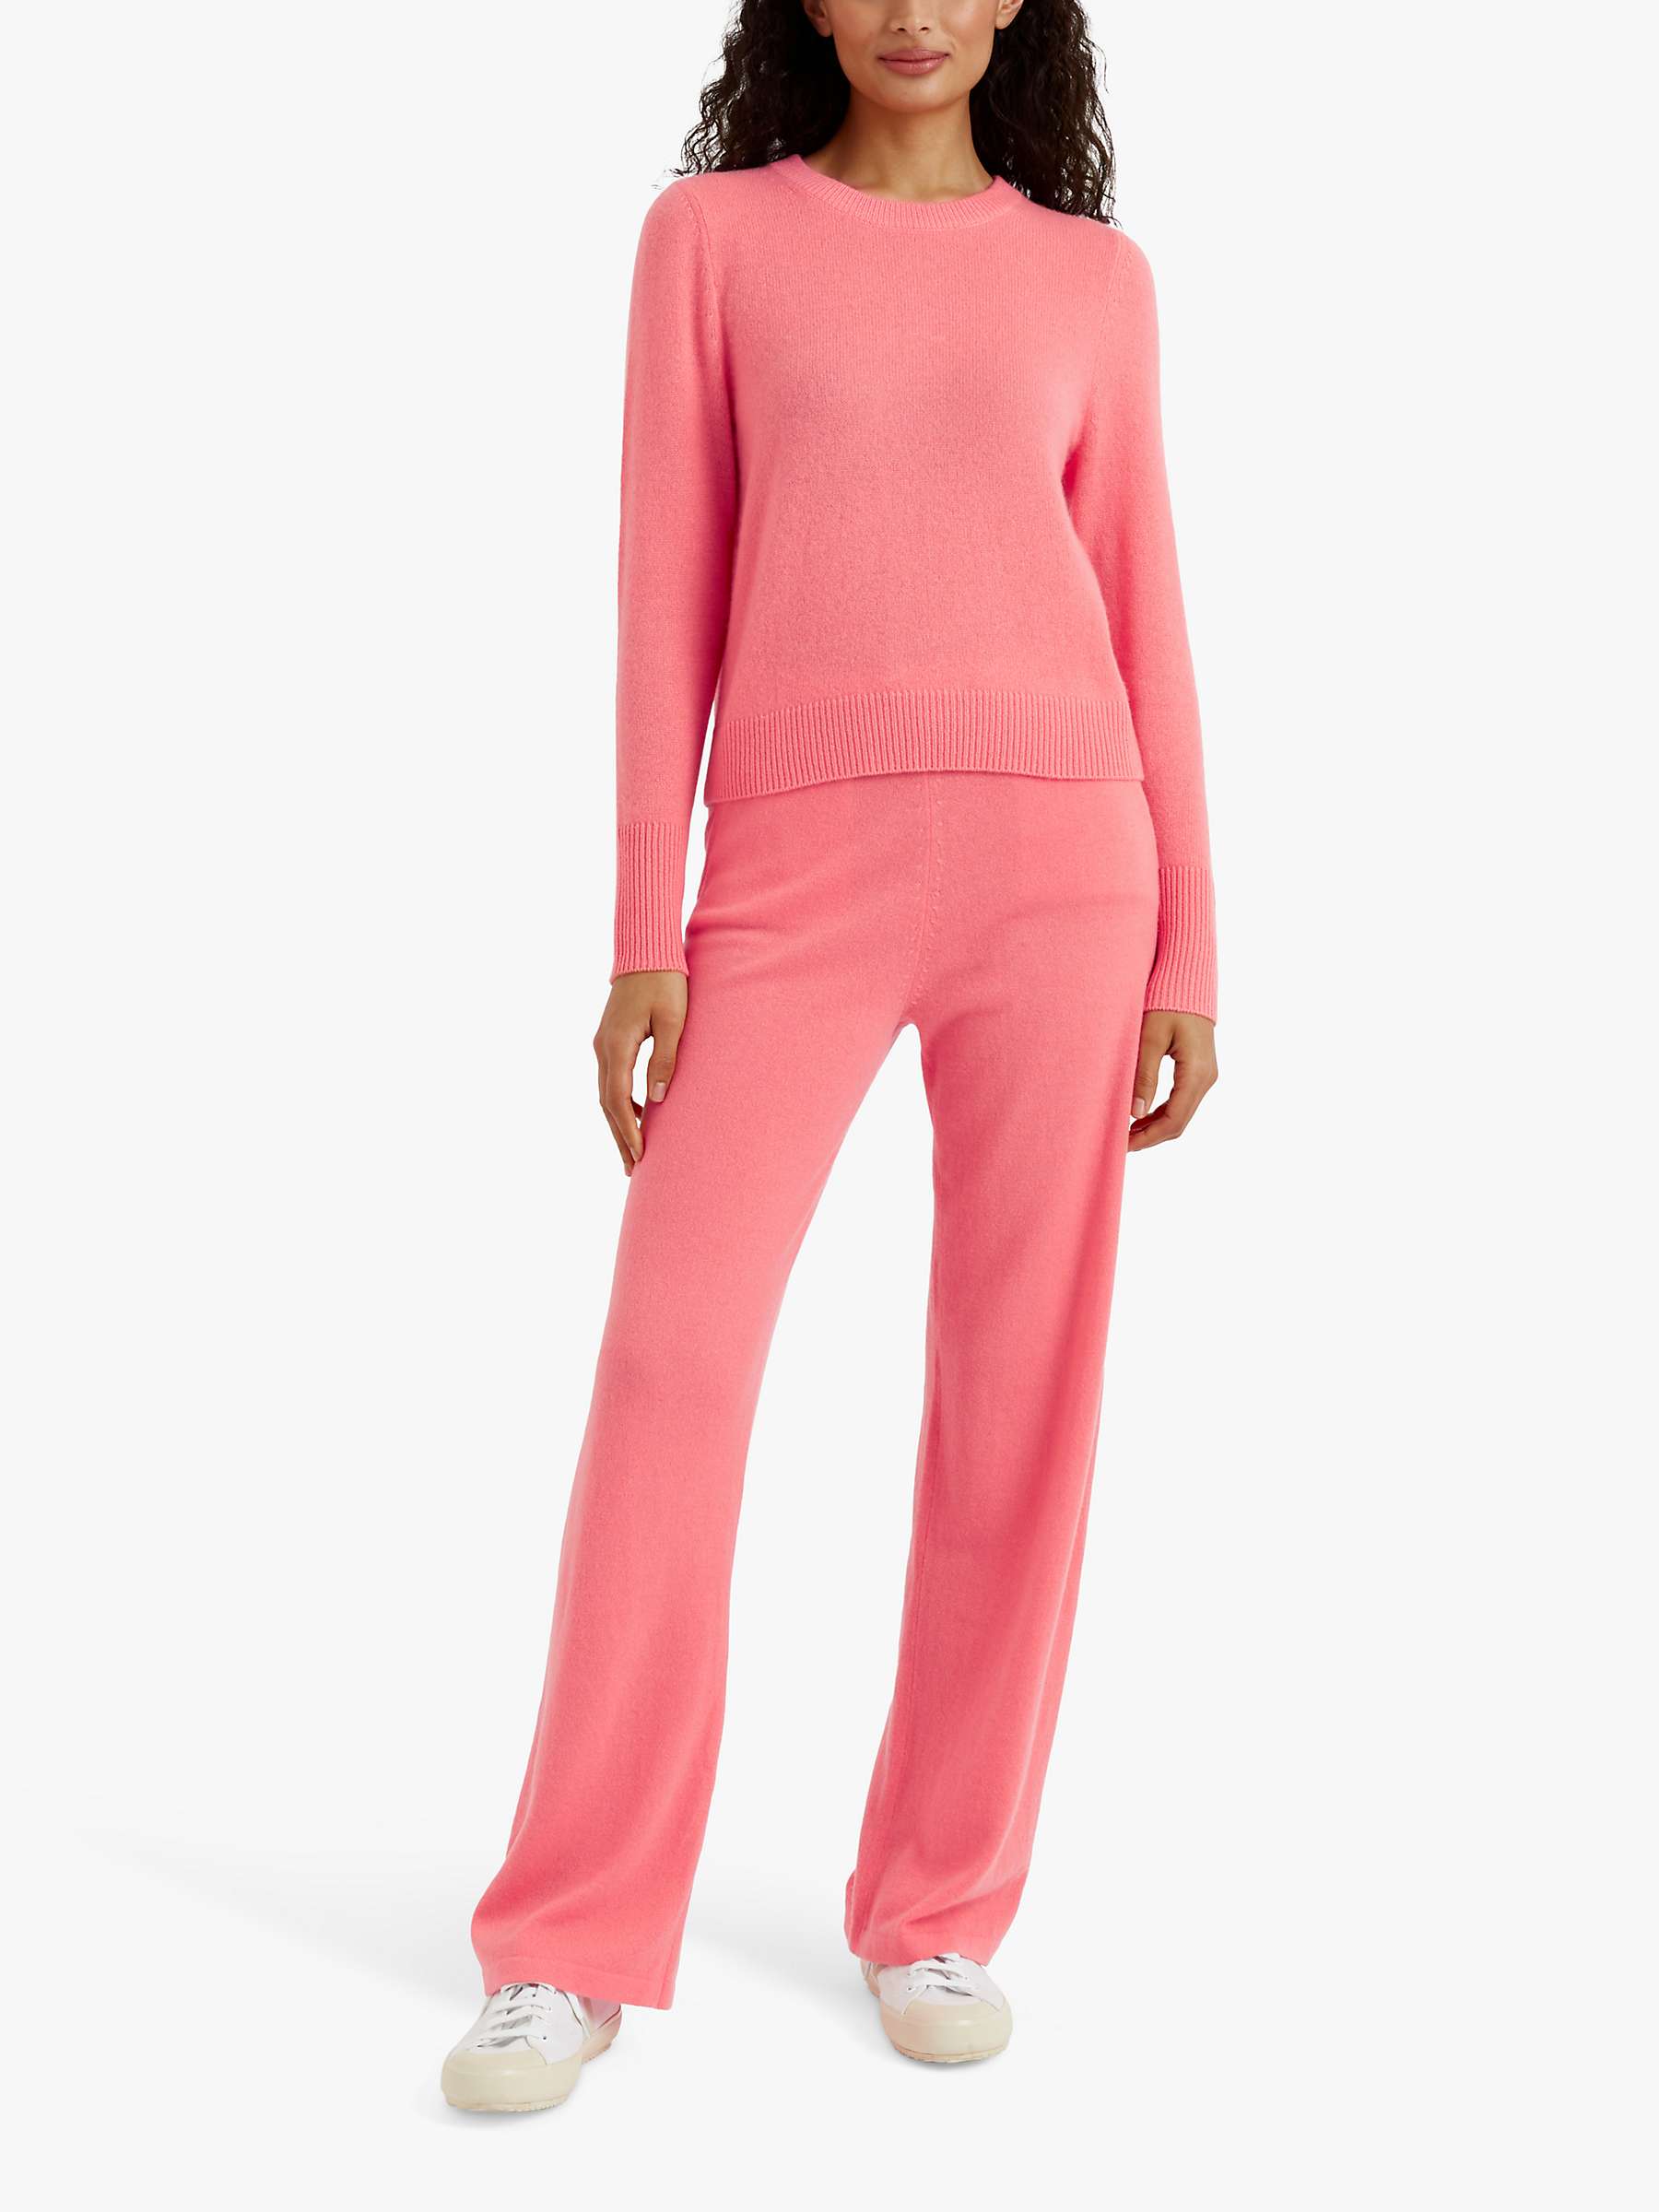 Buy Chinti & Parker Cropped Cashmere Jumper Online at johnlewis.com